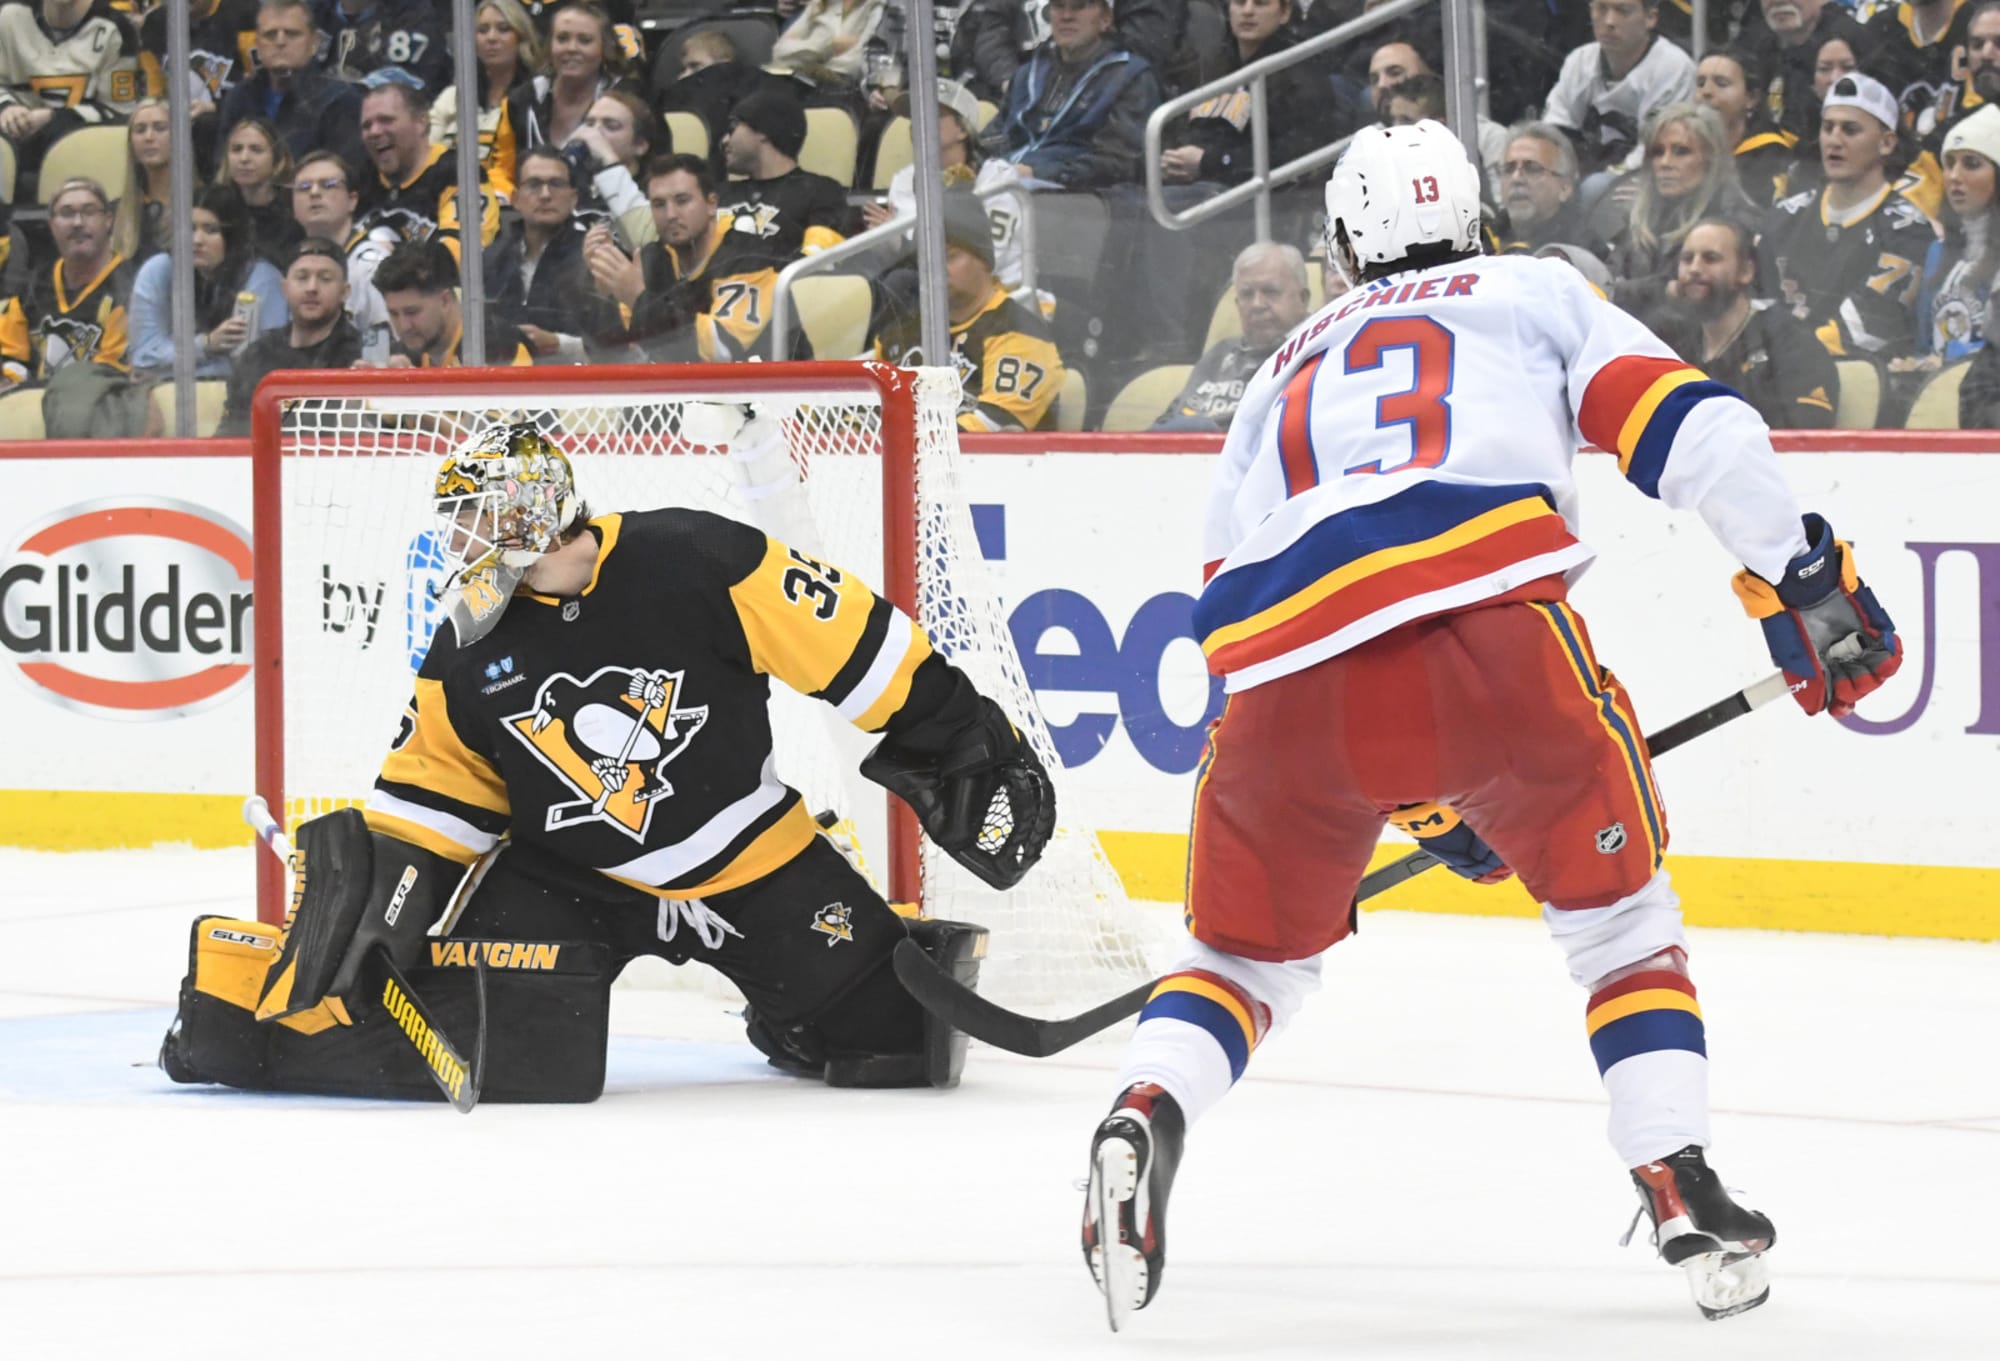 What's new with the New Jersey Devils, the Penguins' next opponent?